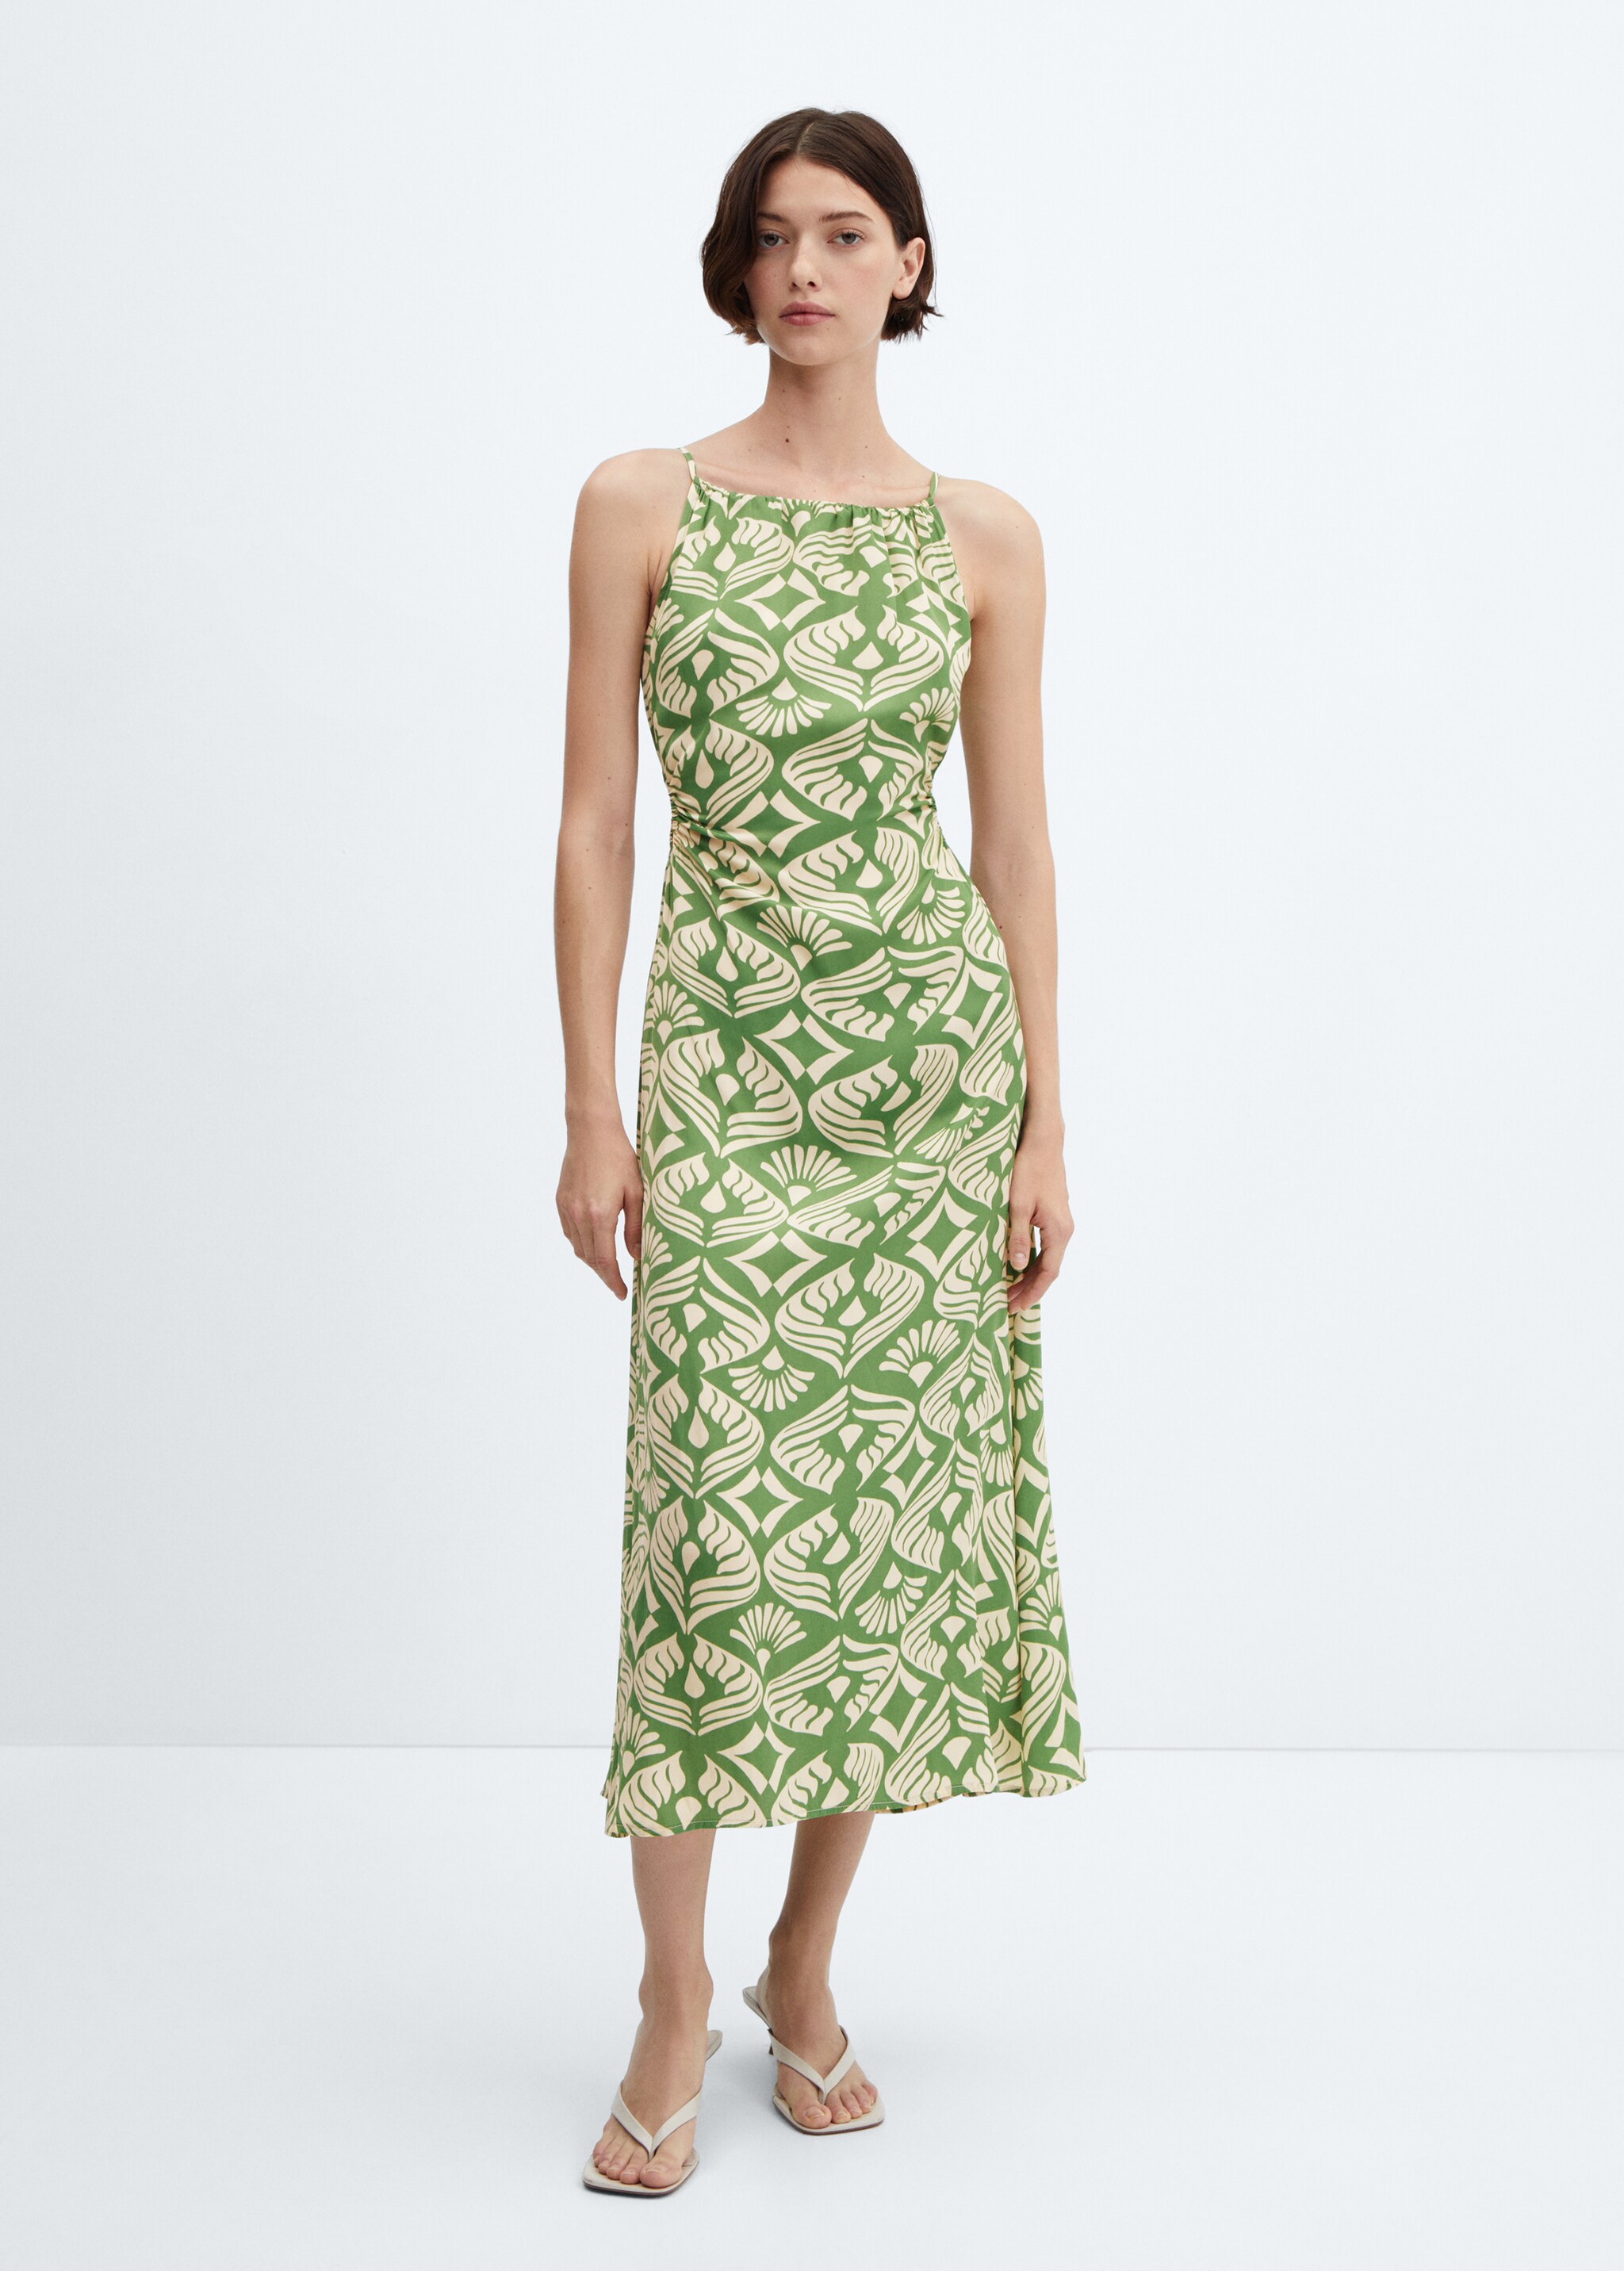 Printed dress with openings - General plane